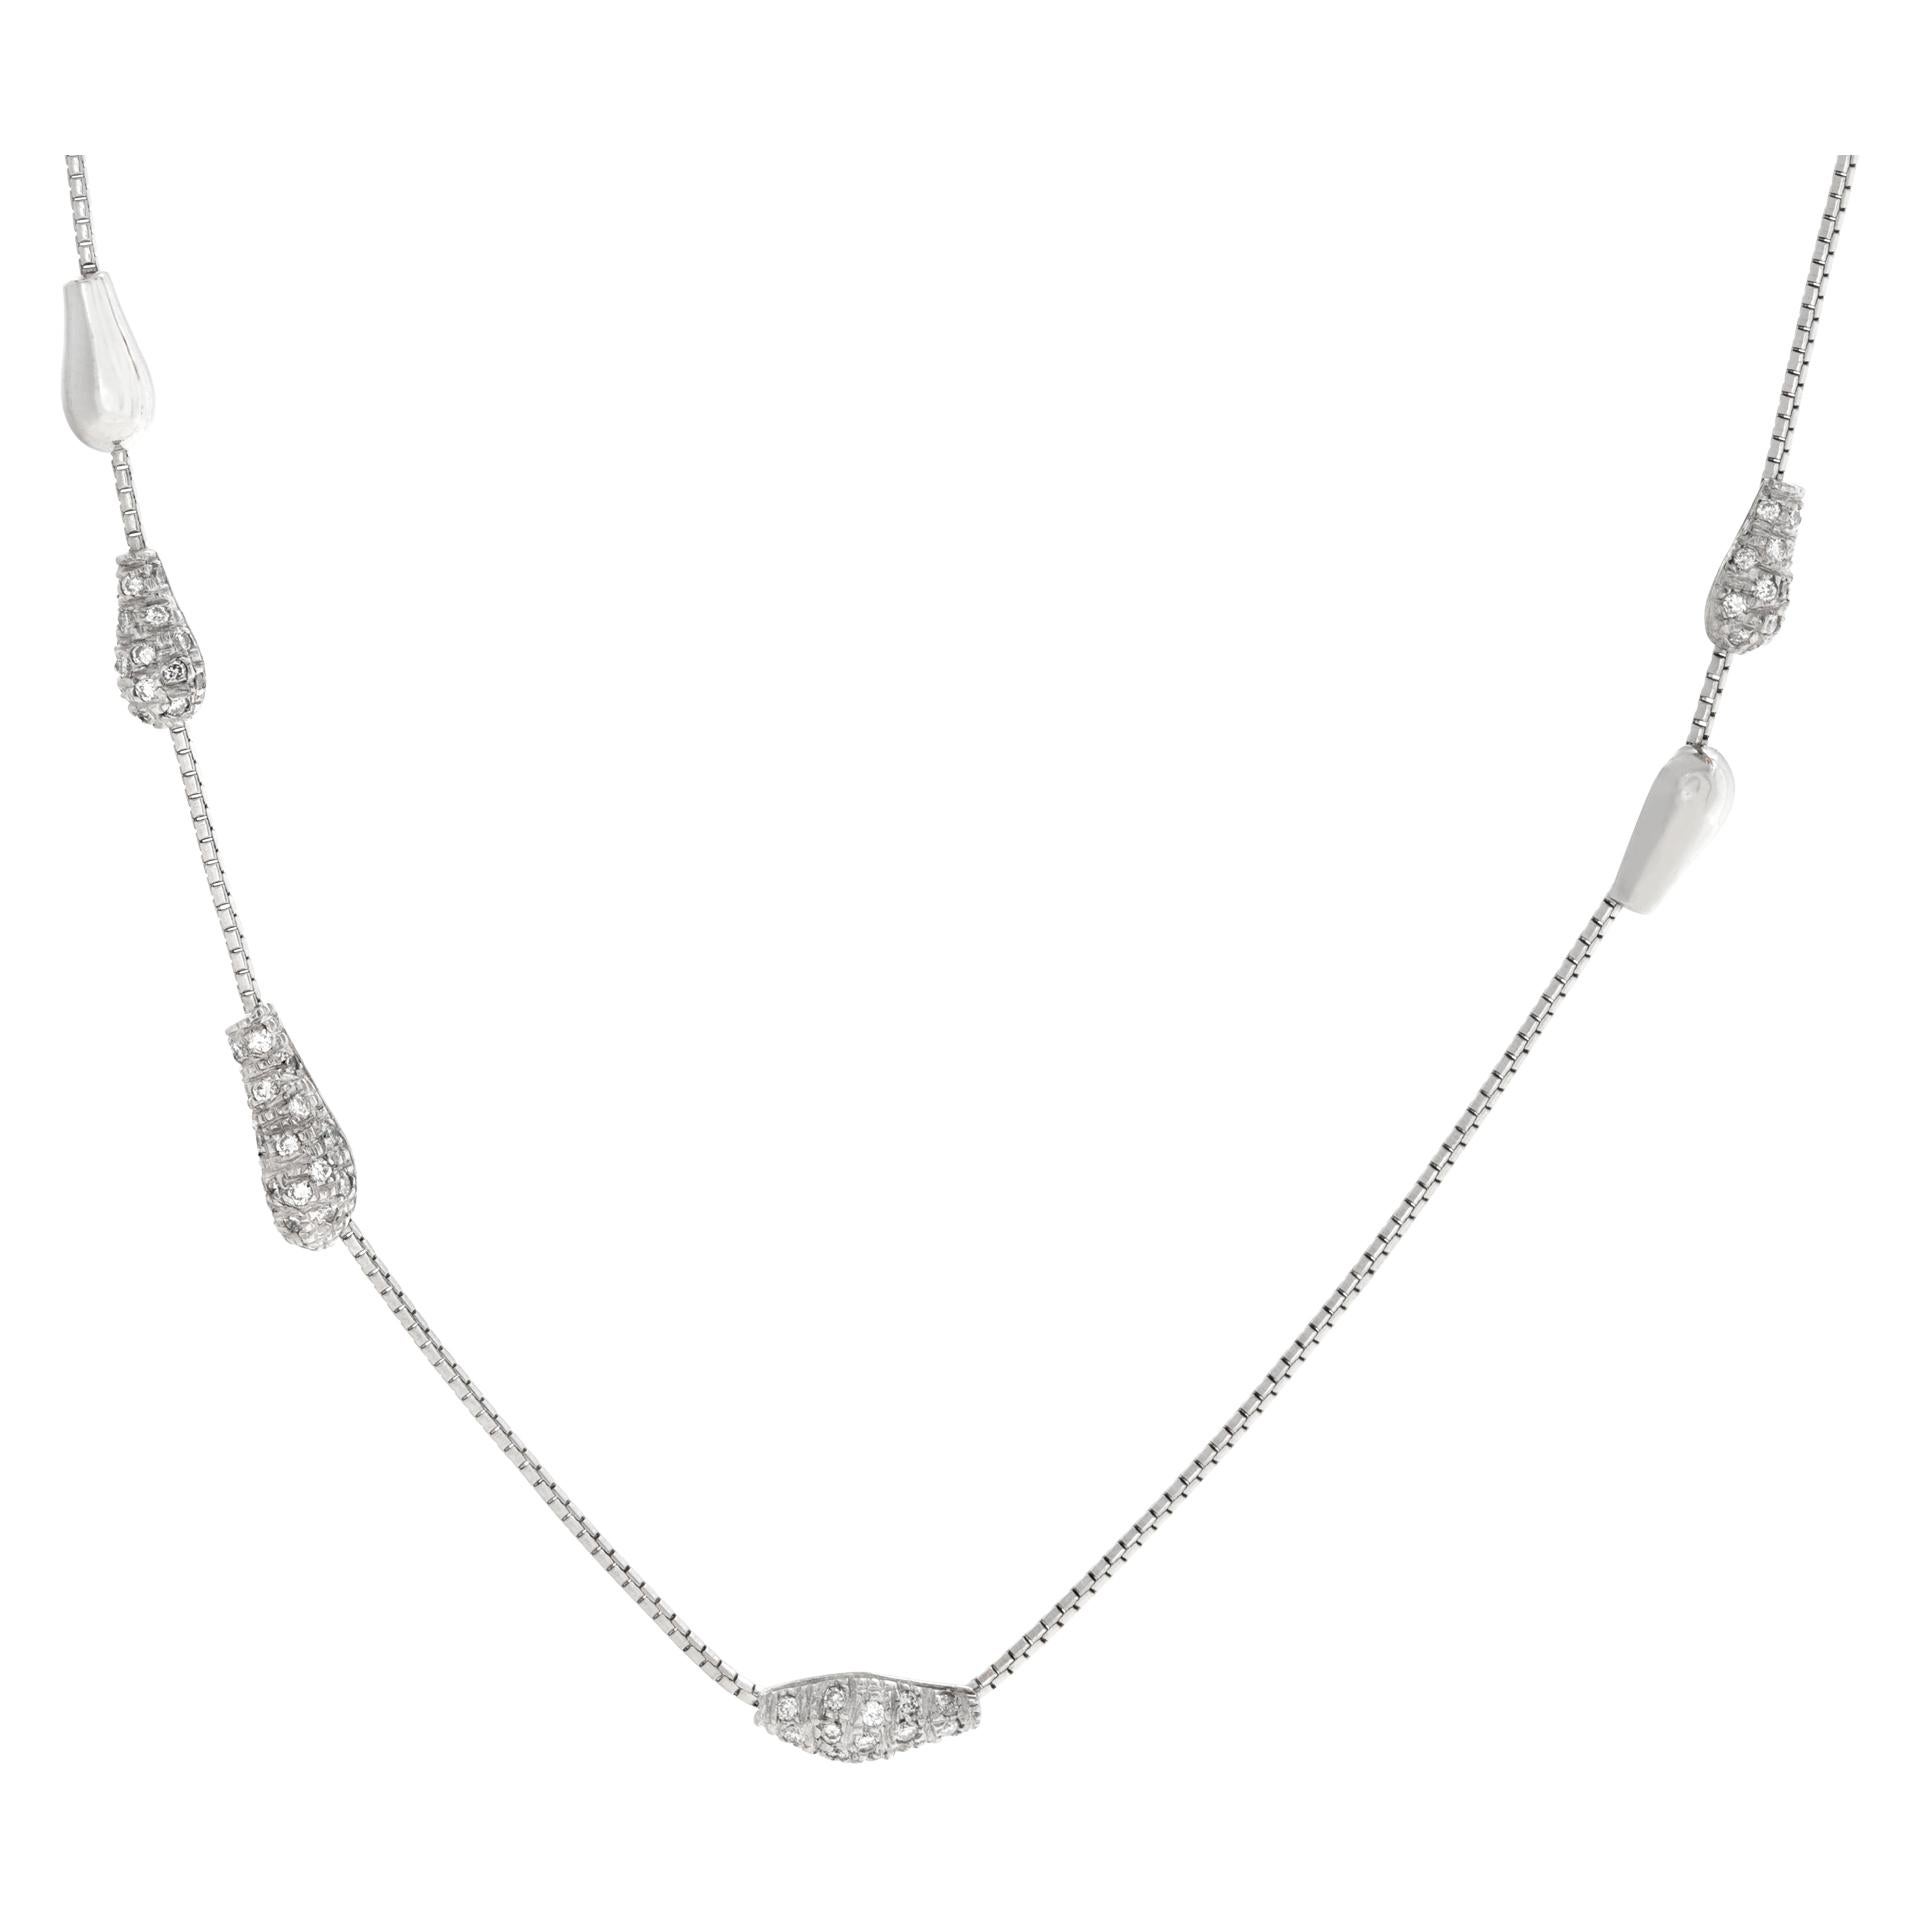 Designer signed Henry Stern diamonds necklace set in 18K white gold. Round brilliant cut diamonds total approx weight 1.00 carat, estimate F color, VVS clarity. 16 inches length.